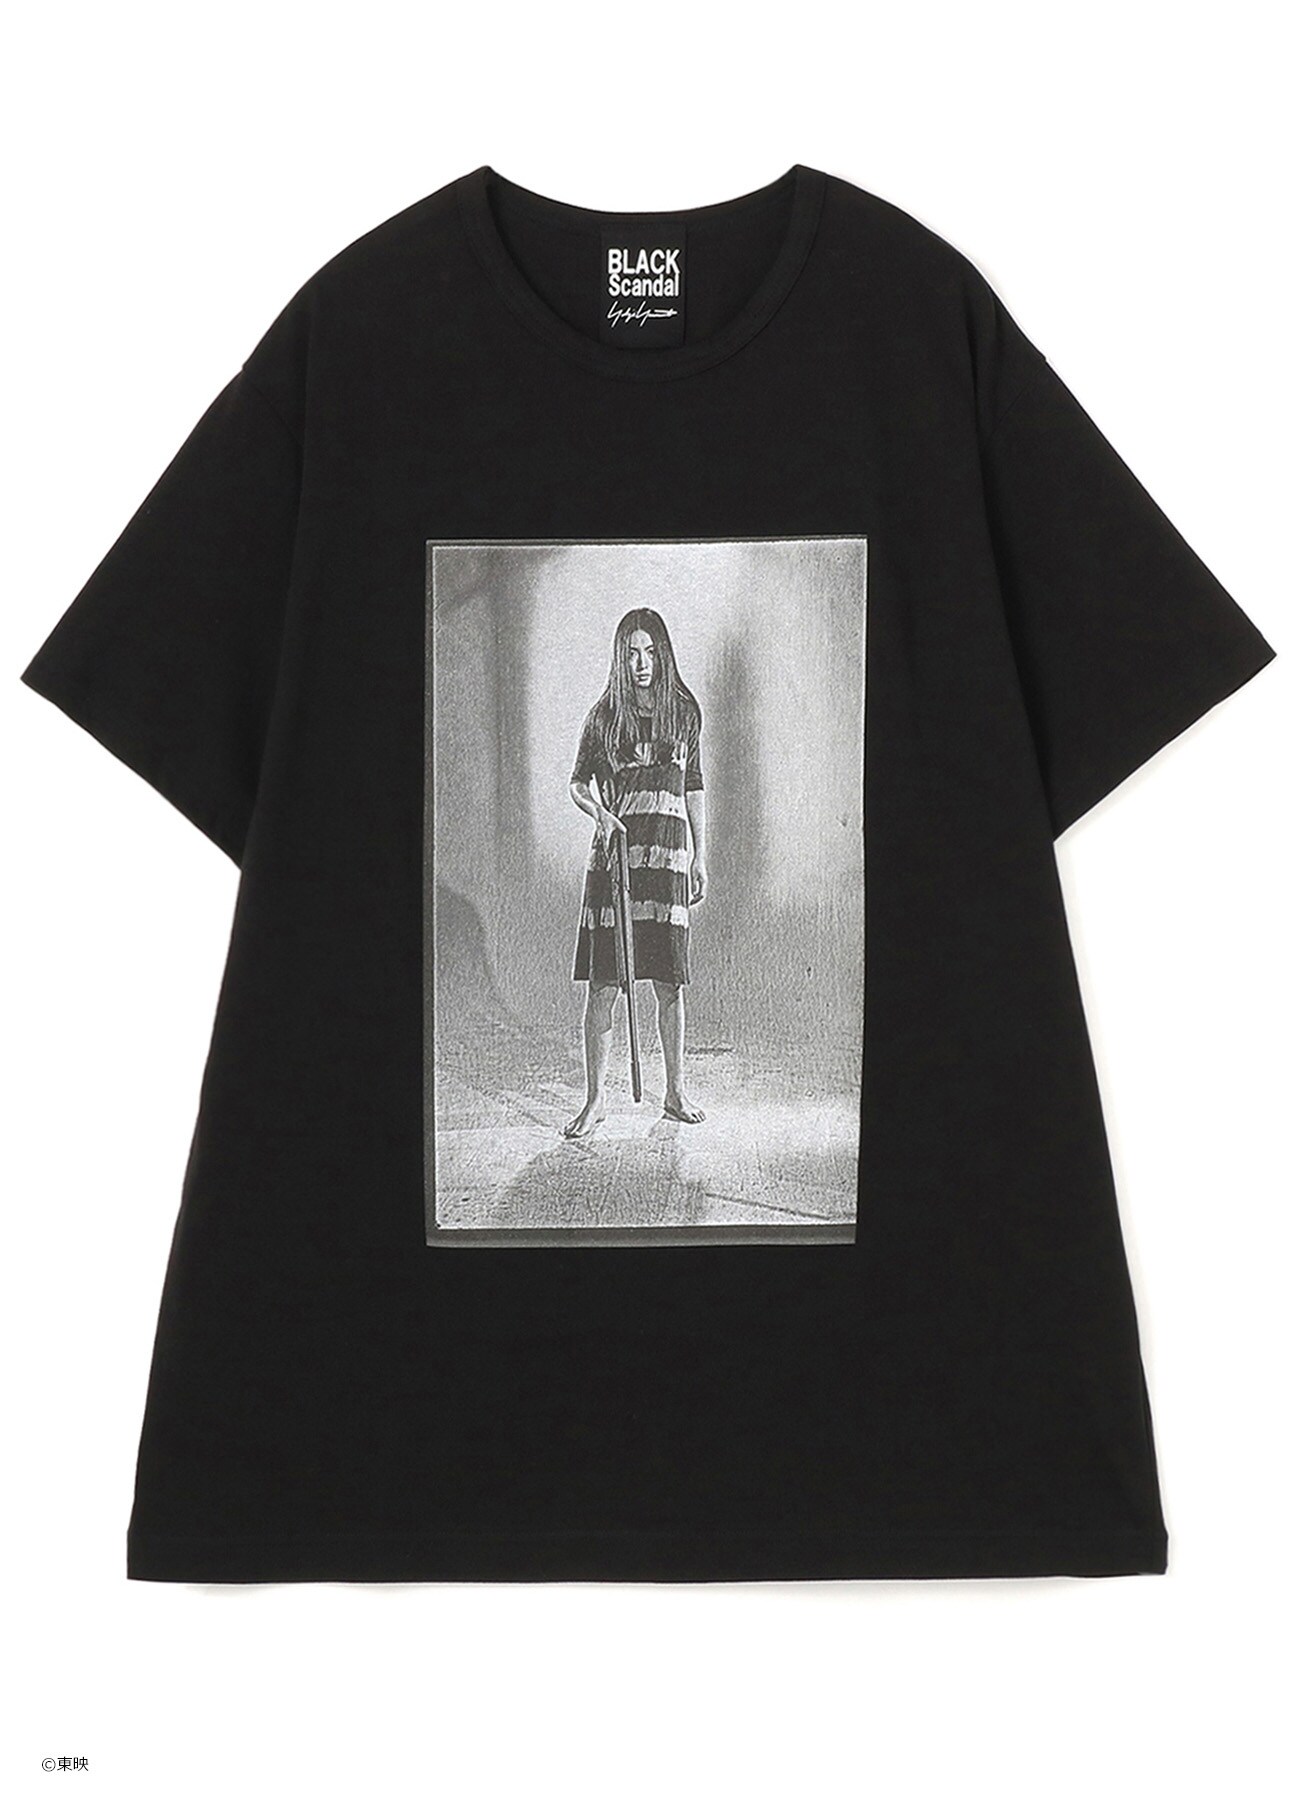 【5/24 10:00(JST) Release】FEMALE CONVICT 701 SCORPION SHORT SLEEVES CUT SEWN